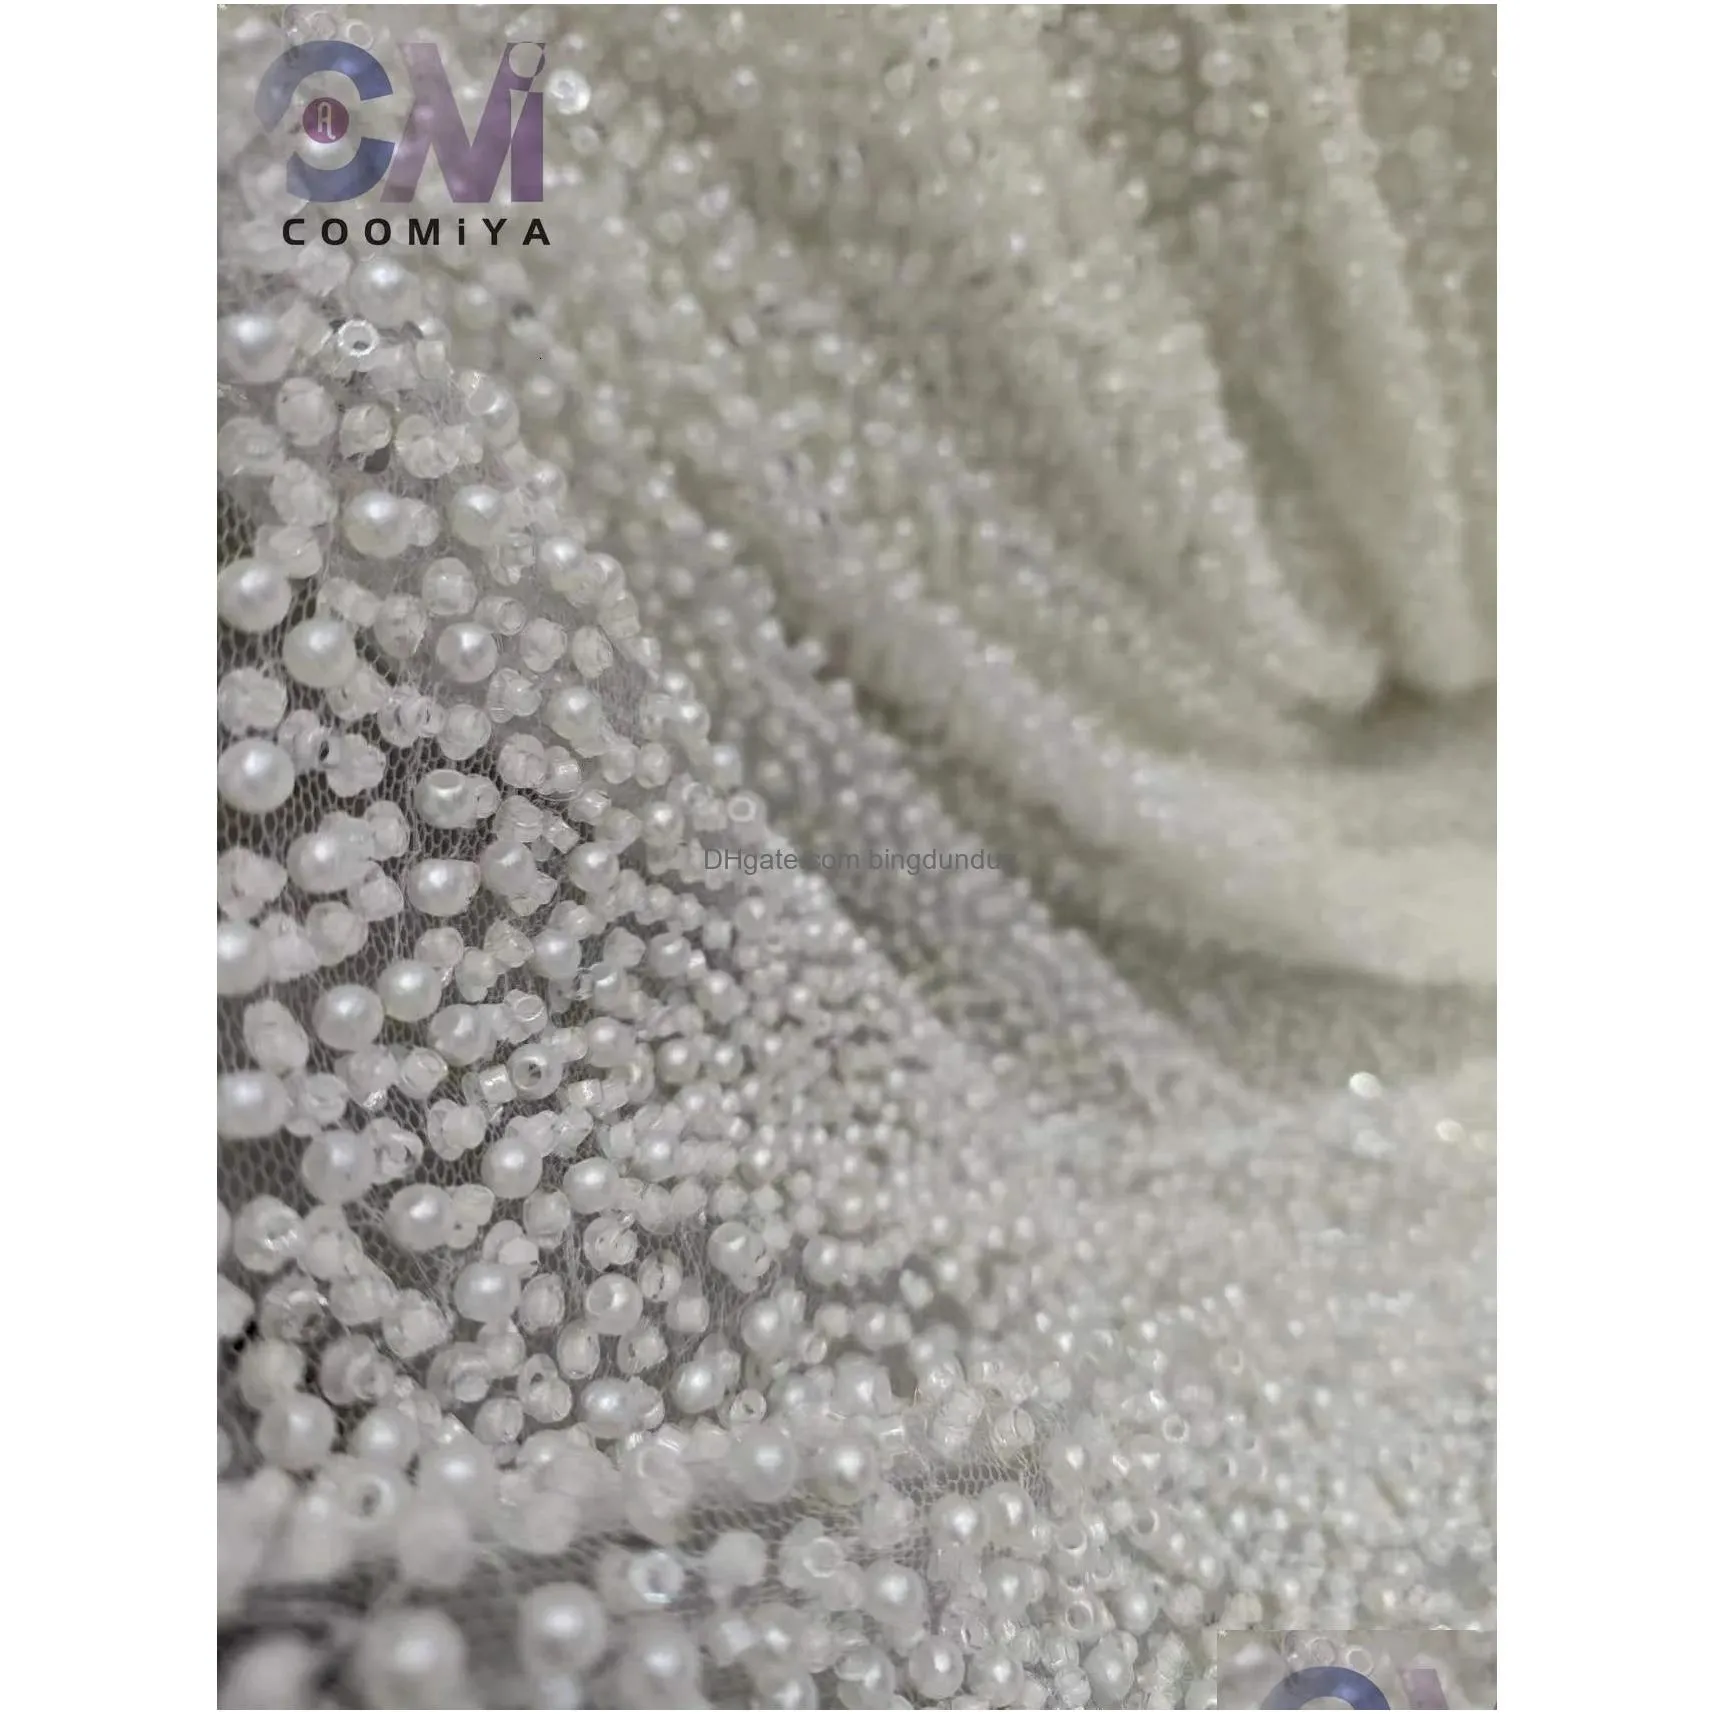 Super Top Quality White Color Full Beads and Sequins Luxury Handmade Fashion Net Lace Fabric For Party Dresses 231226